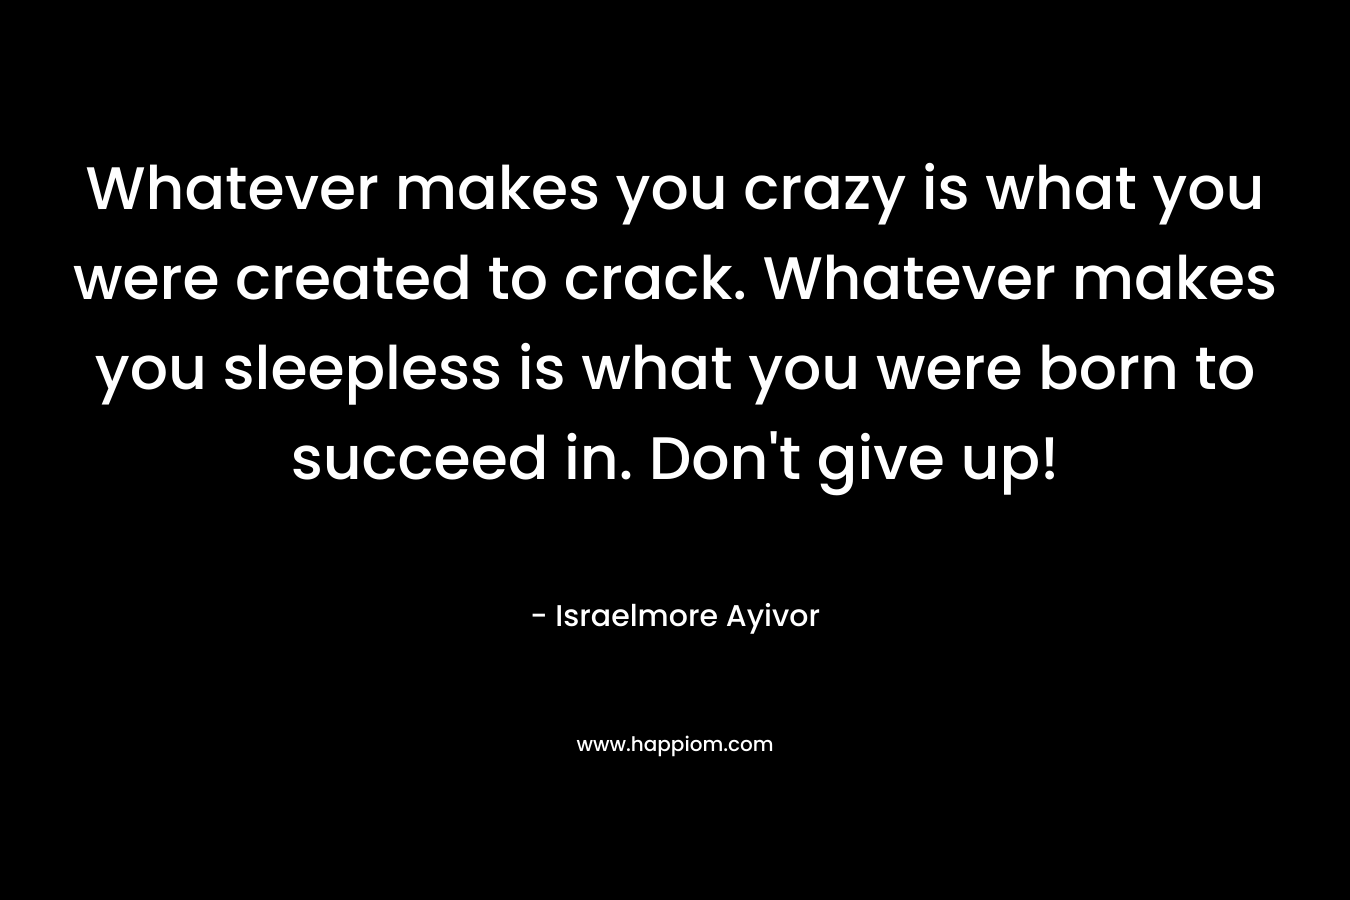 Whatever makes you crazy is what you were created to crack. Whatever makes you sleepless is what you were born to succeed in. Don't give up!